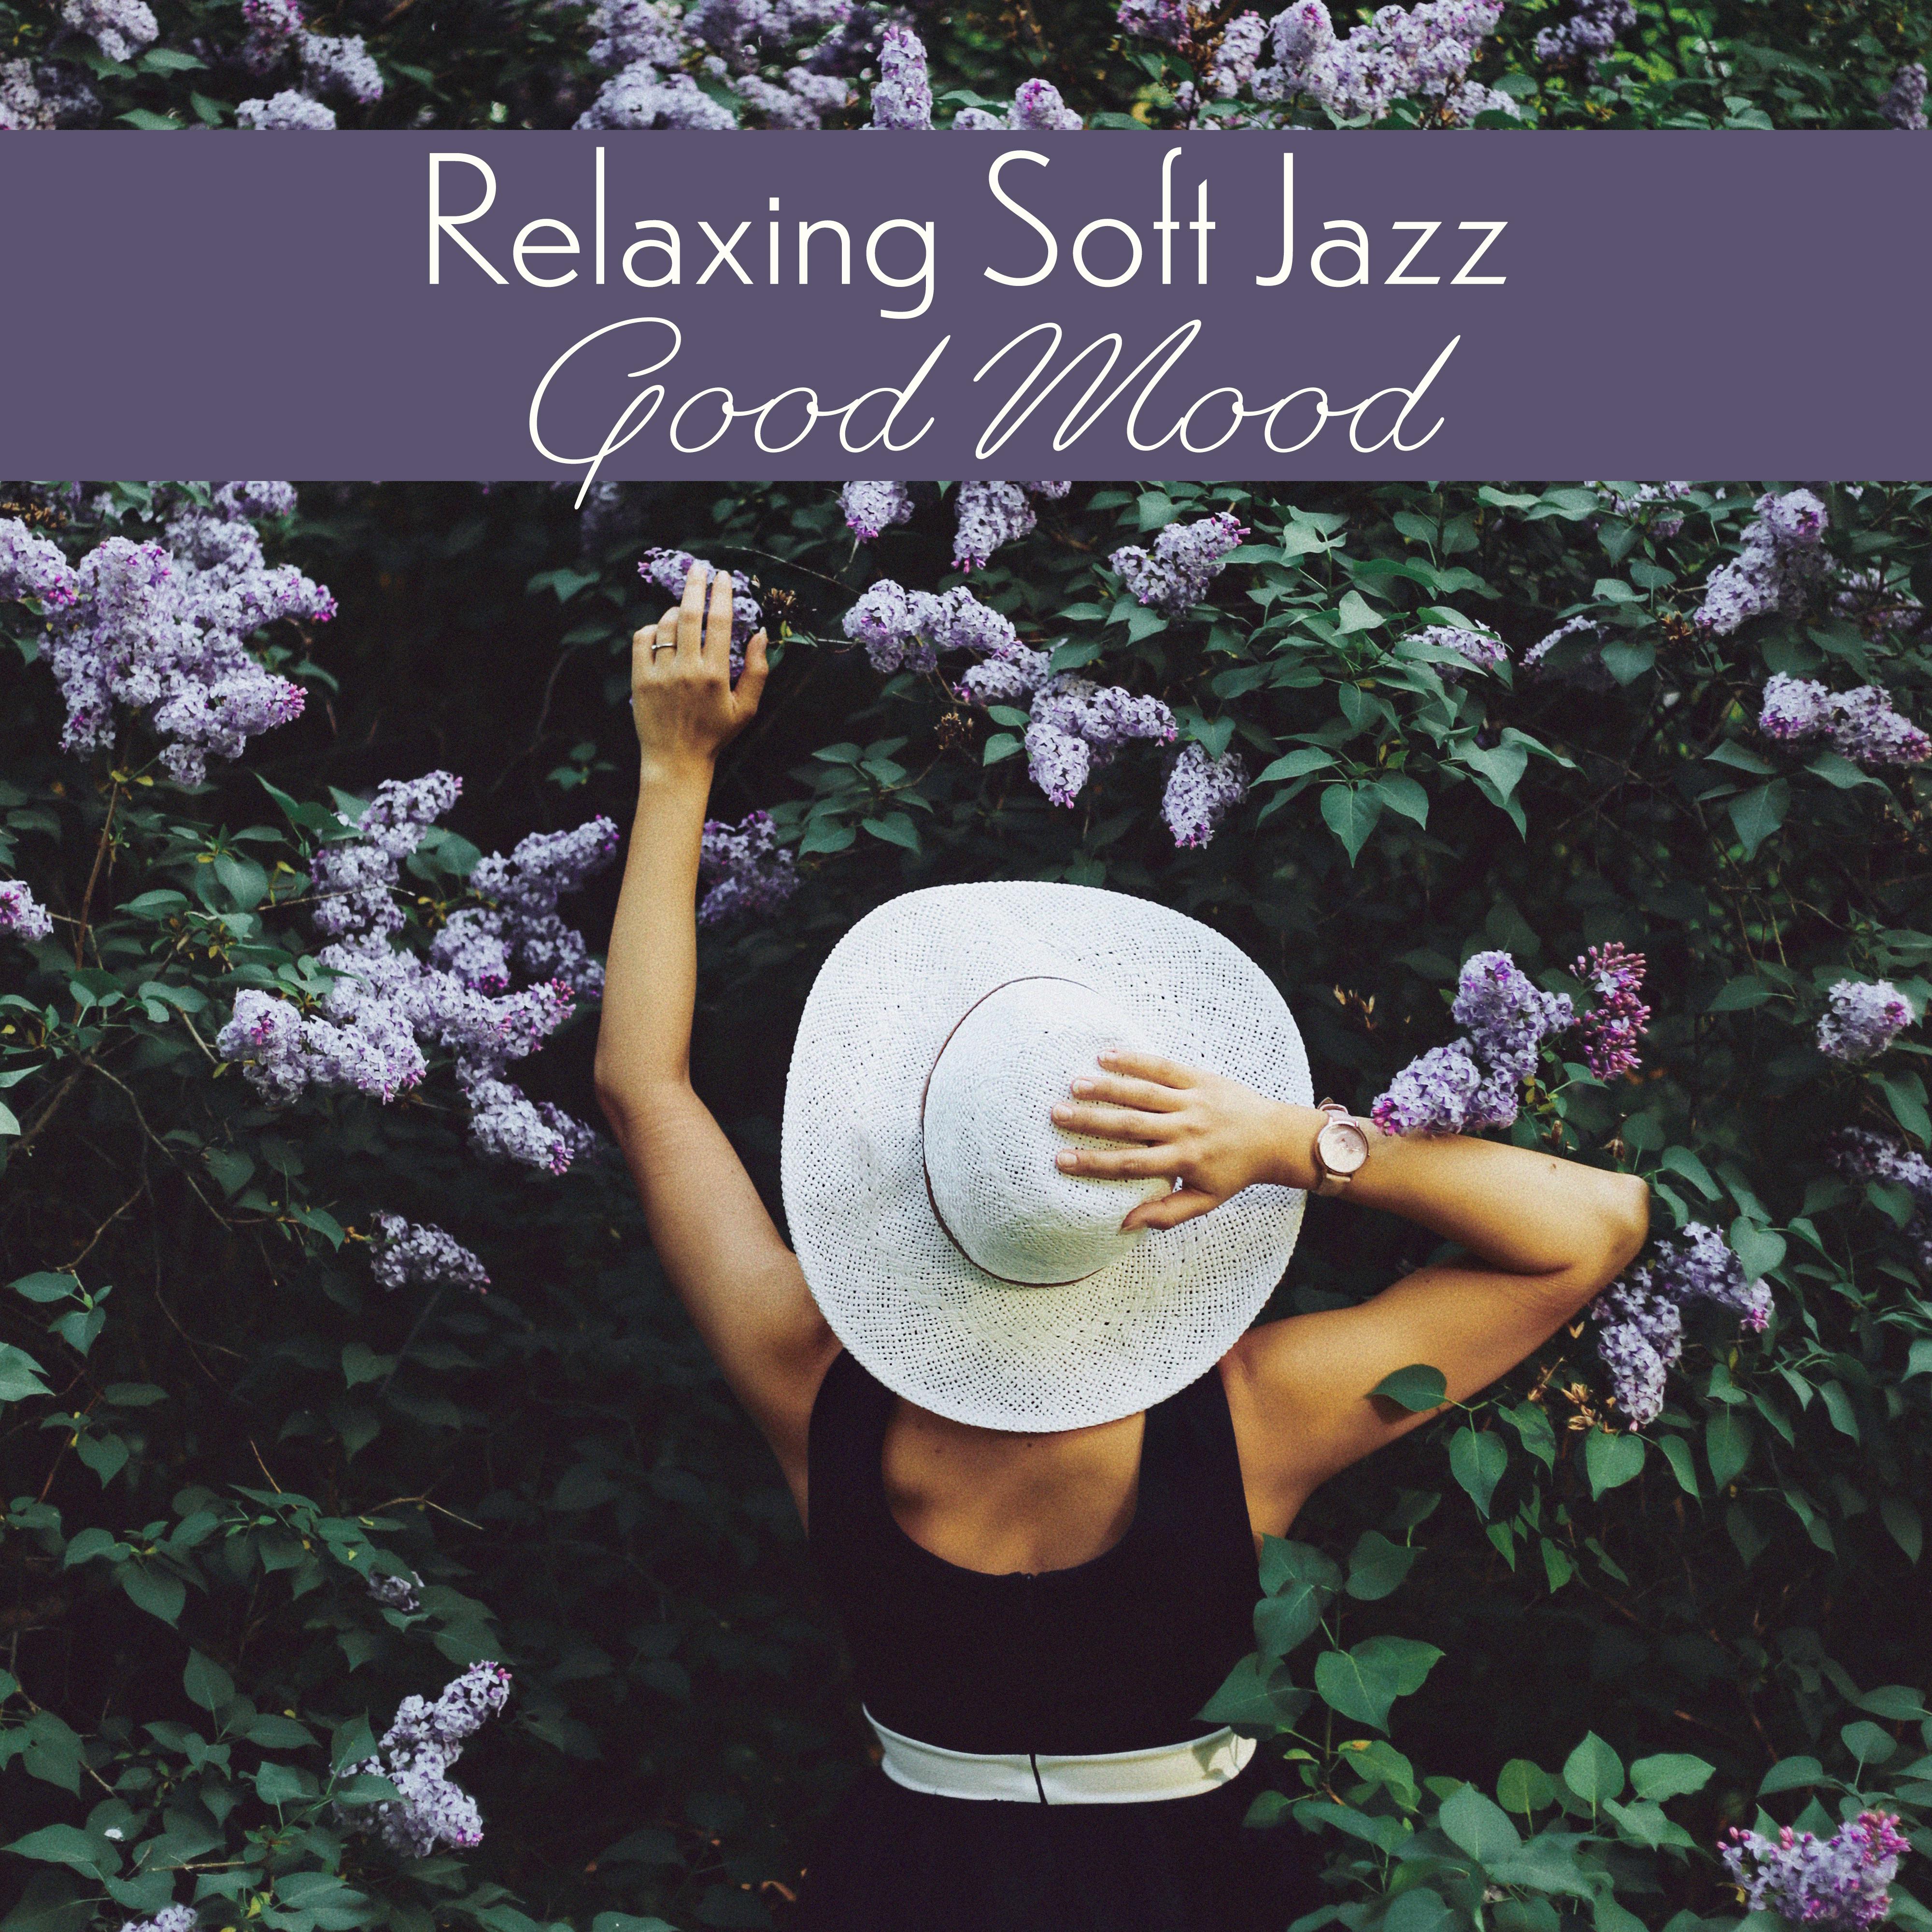 Relaxing Soft Jazz Good Mood: 2019 Smooth Sensual Jazz Compilation, Vintage Melodies with Sounds of Piano, Saxophone, Guitar & Many More